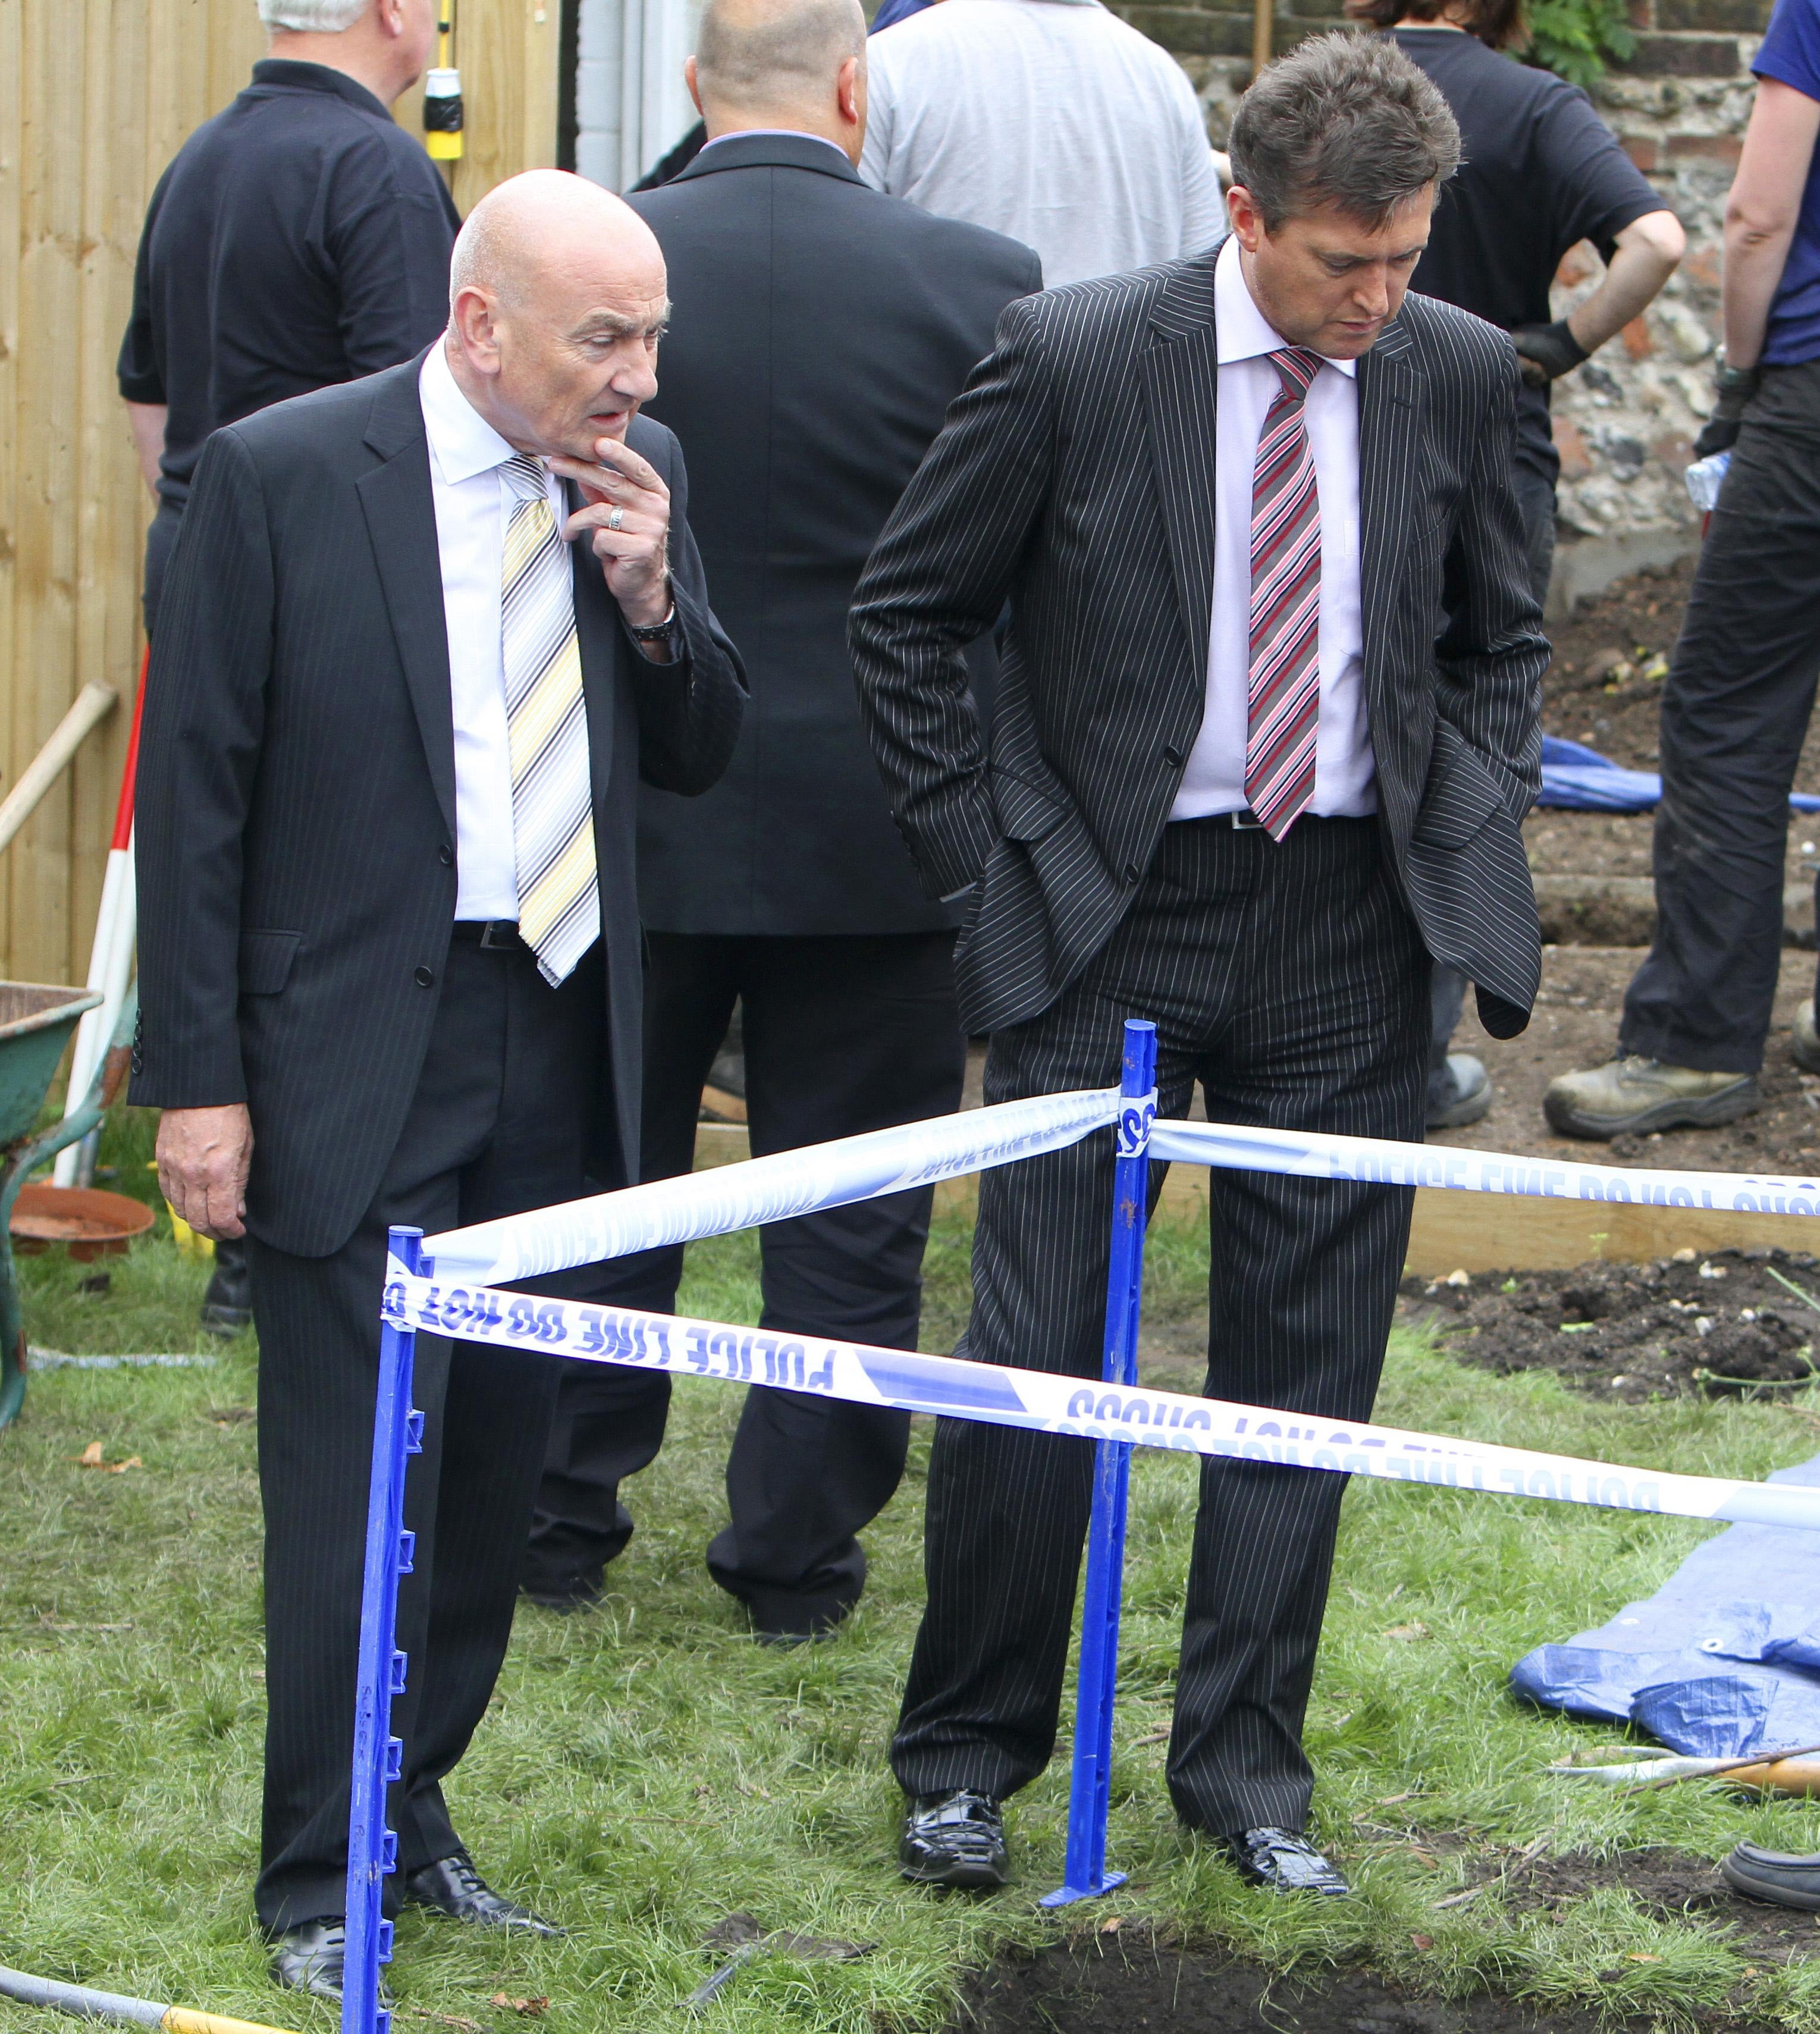 David Swindle and Detective Sergeant Graham MacKellar (right) of Strathclyde Police join specialist officers from Sussex Police as they continue to search the garden of a house in Station Road, Portslade, where Peter Tobin once lived.